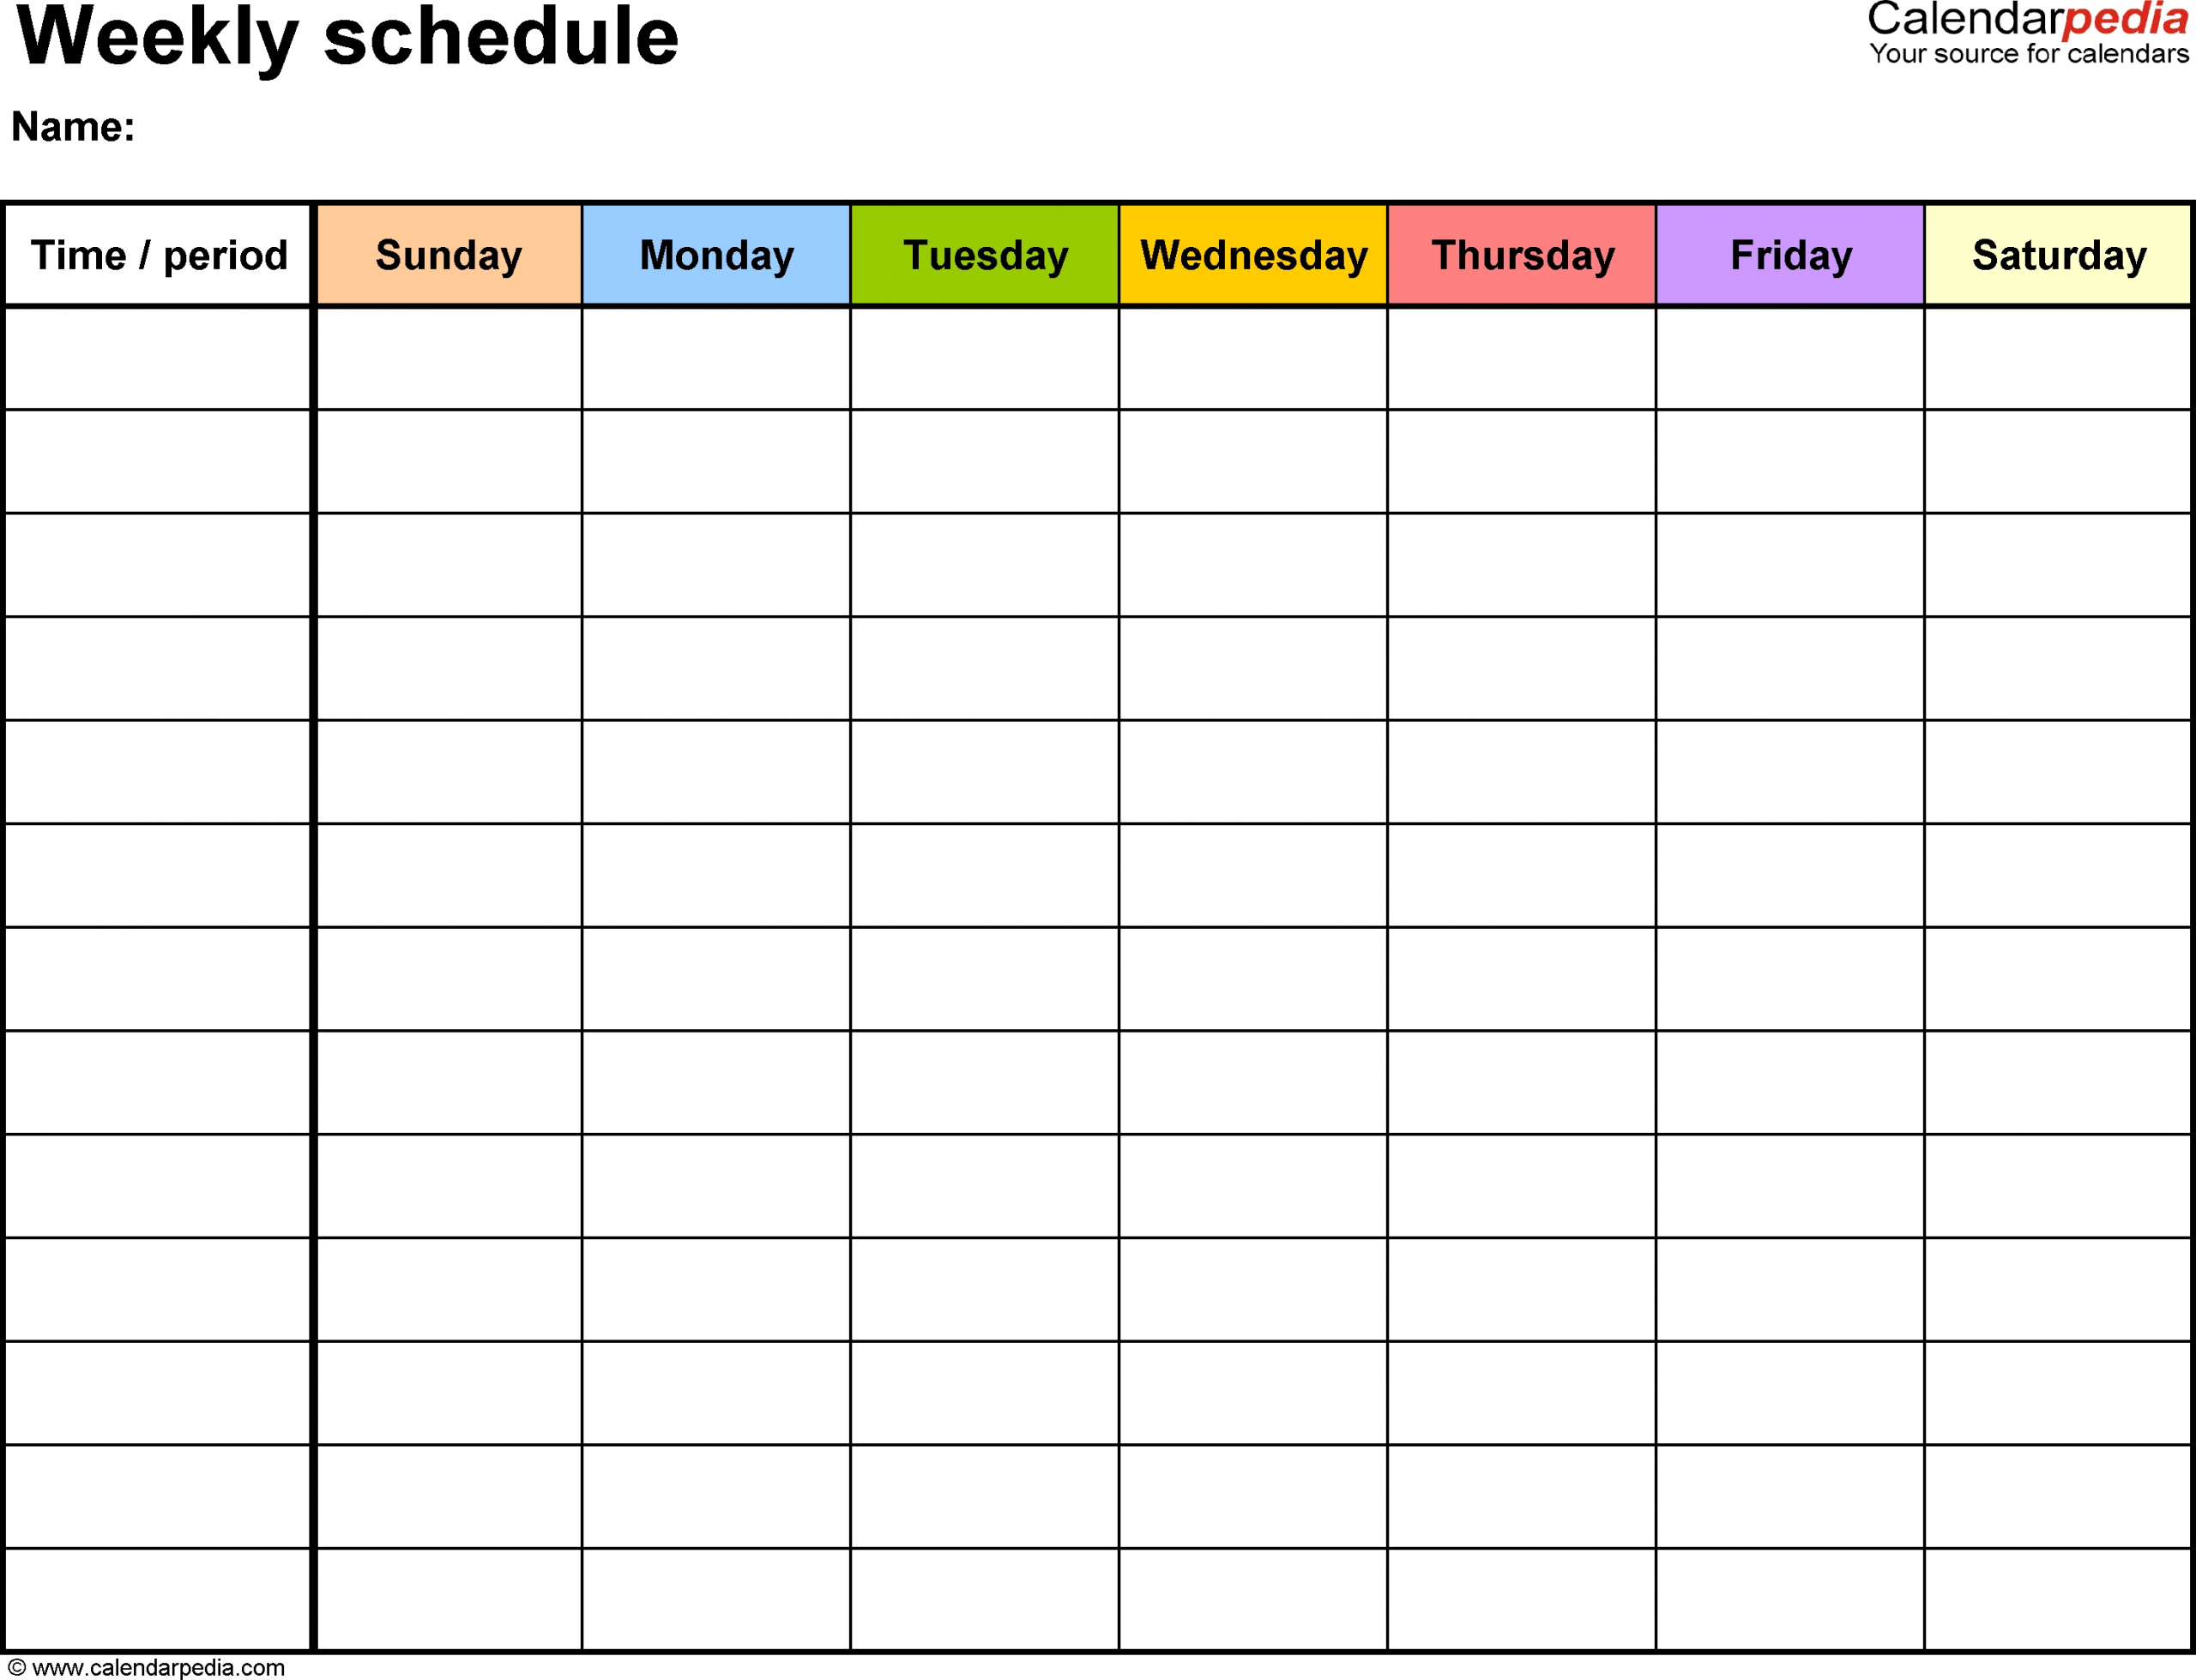 Free Weekly Schedule Templates For Word - 18 Templates throughout Weekly Schedule Monday - Sunday